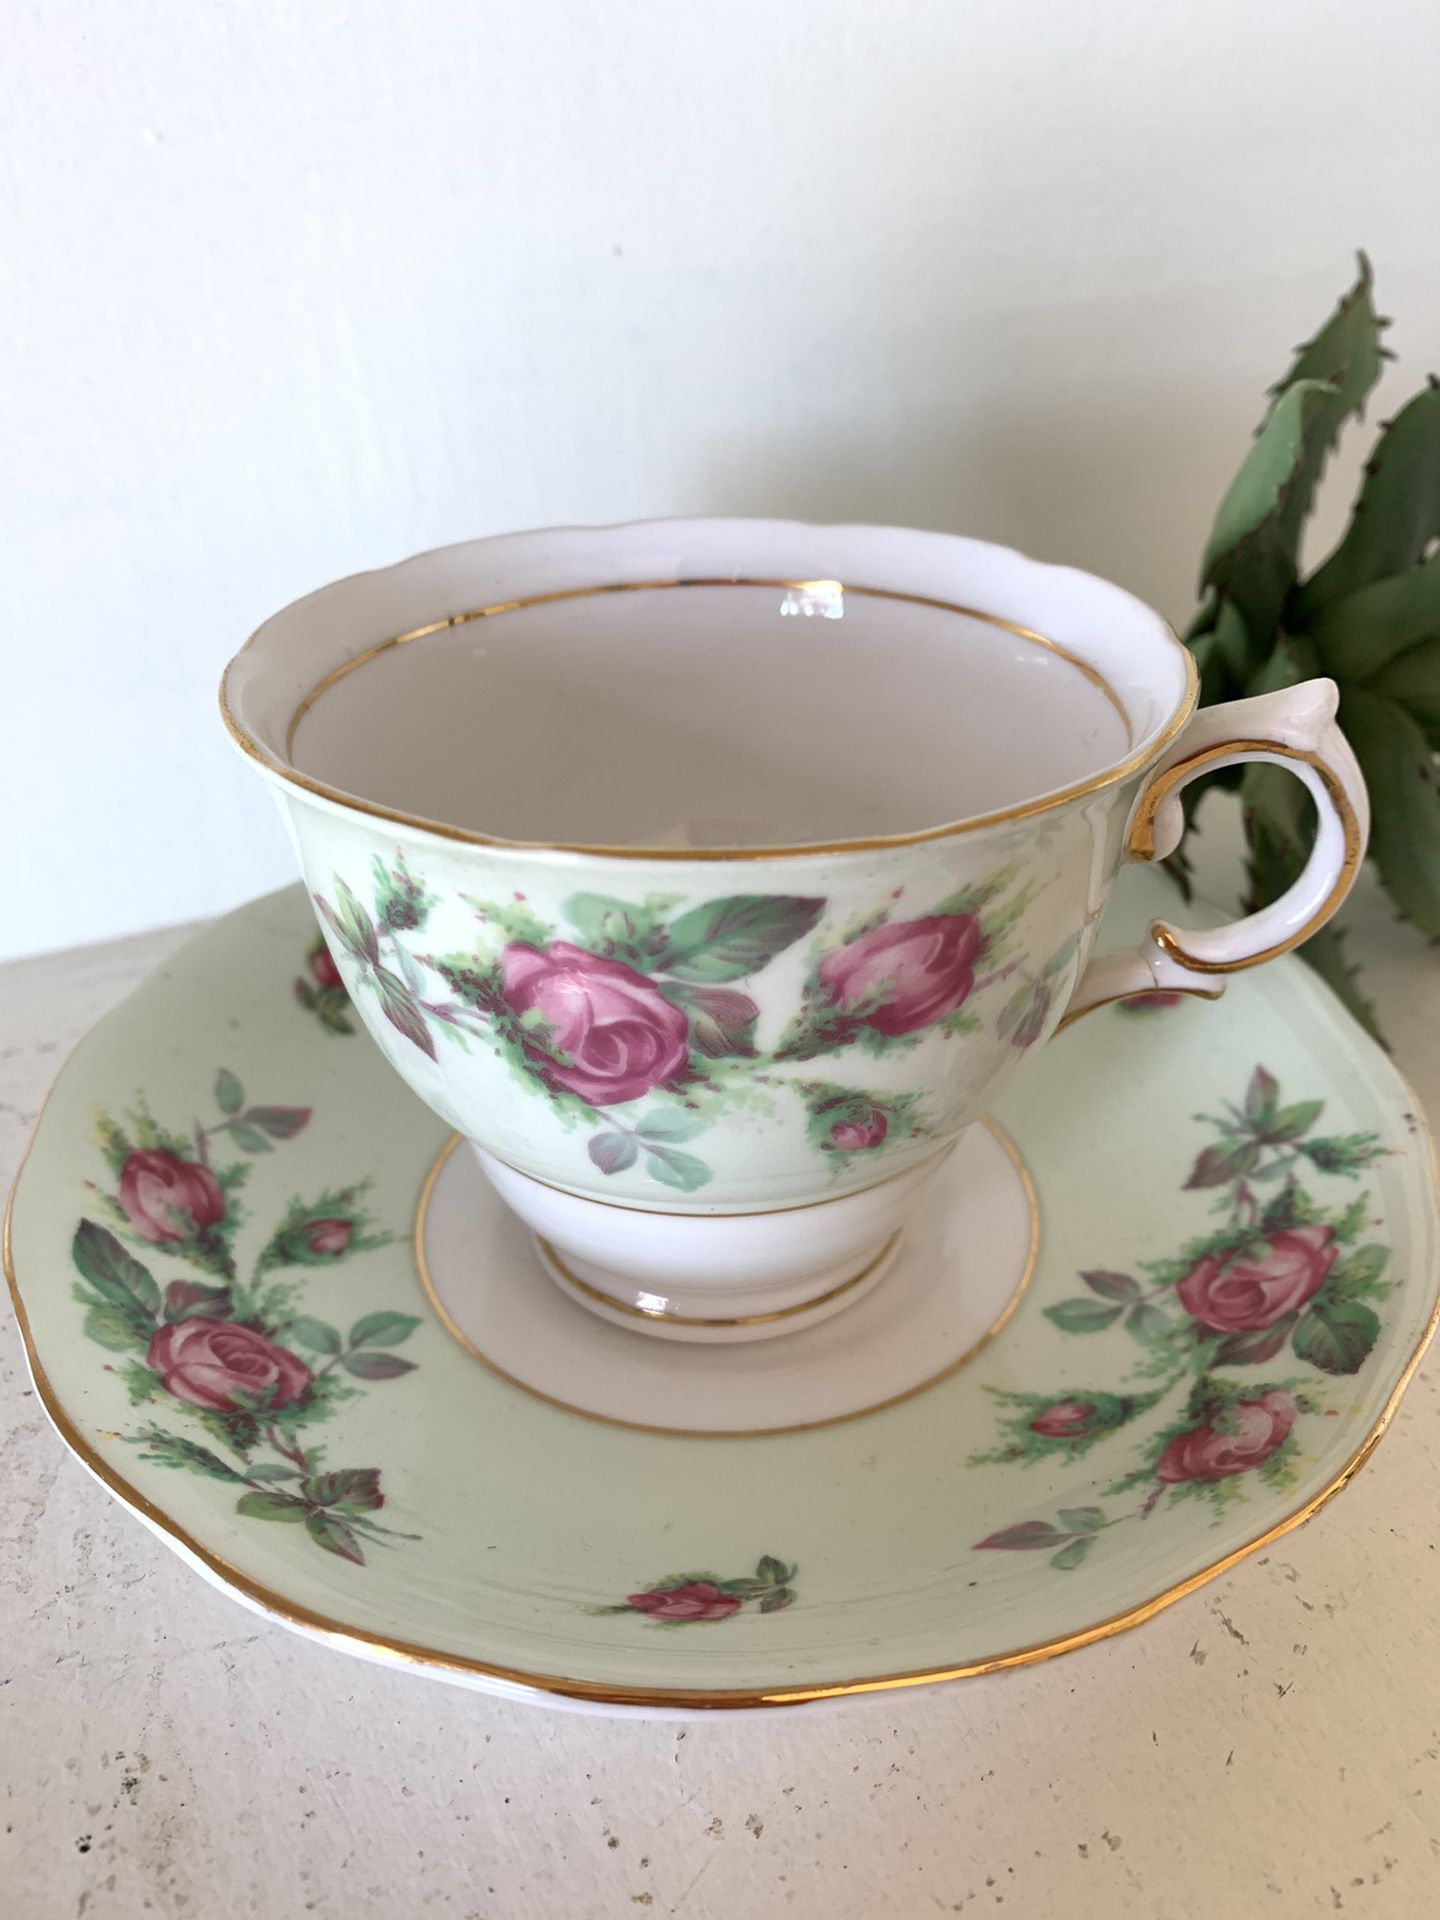 Colclough bone china made in England tea cup and saucer